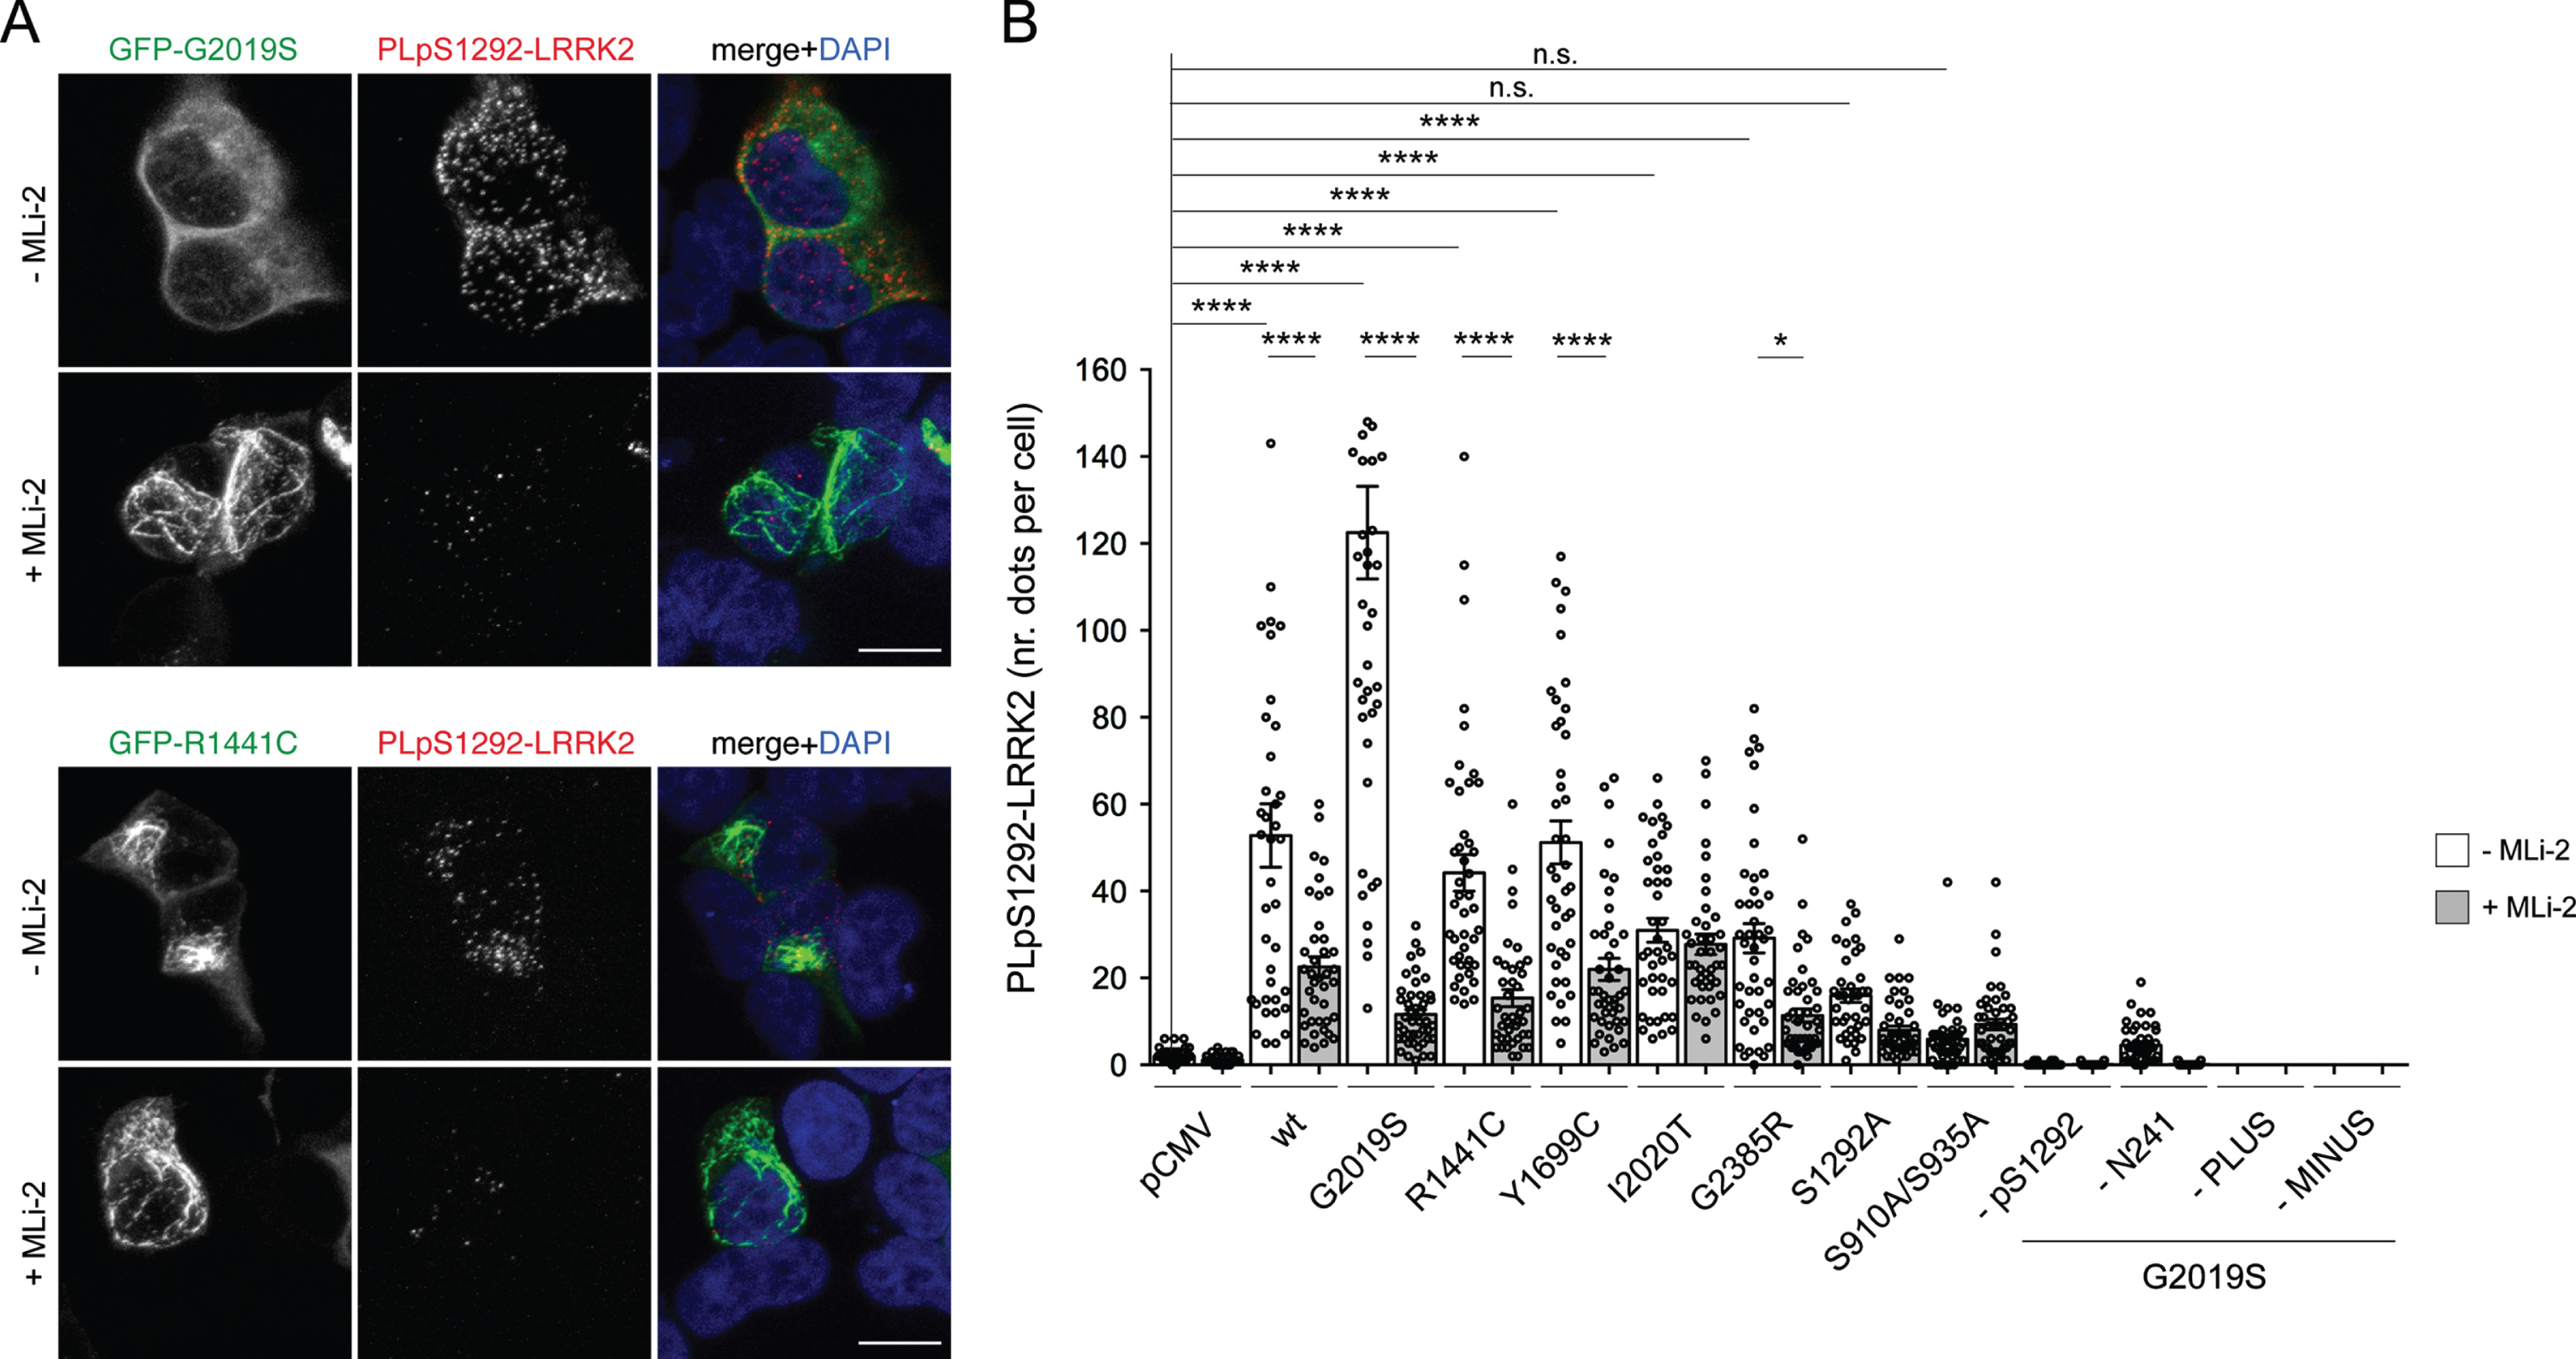 Detection of active LRRK2 in HEK293T cells overexpressing GFP-tagged WT and mutant LRRK2 constructs using PLA. A) HEK293T cells were transiently transfected with either GFP-tagged G2019S LRRK2 (top) or GFP-tagged R1441C LRRK2 (bottom) and incubated in the absence or presence of MLi-2 (100 nM, 2 h) prior to pS1292-LRRK2 PLA assay (red), and coverslips stained with DAPI (blue). Scale bar, 10 μm. Note that in the absence of MLi-2, GFP-tagged G2019S LRRK2 is largely cytosolic, whilst GFP-tagged R1441C LRRK2 displays a filamentous localization. In the presence of MLi-2, both GFP-tagged G2019S and R1441C LRRK2 display a filamentous localization, previously described to colocalize with microtubules. B) HEK293T cells were transfected with either empty vector (pCMV) or with the indicated GFP-tagged LRRK2 constructs and incubated in the absence or presence of MLi-2 (100 nM, 2 h). Cells were subjected to pS1292-LRRK2 PLA assay, and PLA signals were quantified as discrete dots due to rolling circle-mediated amplification in each of around 50 randomly transfected cells per condition. Control PLA assays were performed in cells transiently transfected with GFP-tagged G2019S LRRK2 and included omission of the anti-pS1292 LRRK2 antibody (–1292), the anti-LRRK2 antibody (-N241A/34), or omission of either PLUS probe (-PLUS) or MINUS probe (-MINUS), respectively. Data depict mean±S.E.M. (****p < 0.001; *p < 0.05; n.s., not significant). The experiment was performed twice with similar results obtained in both cases, and comparable to those previously described [20].